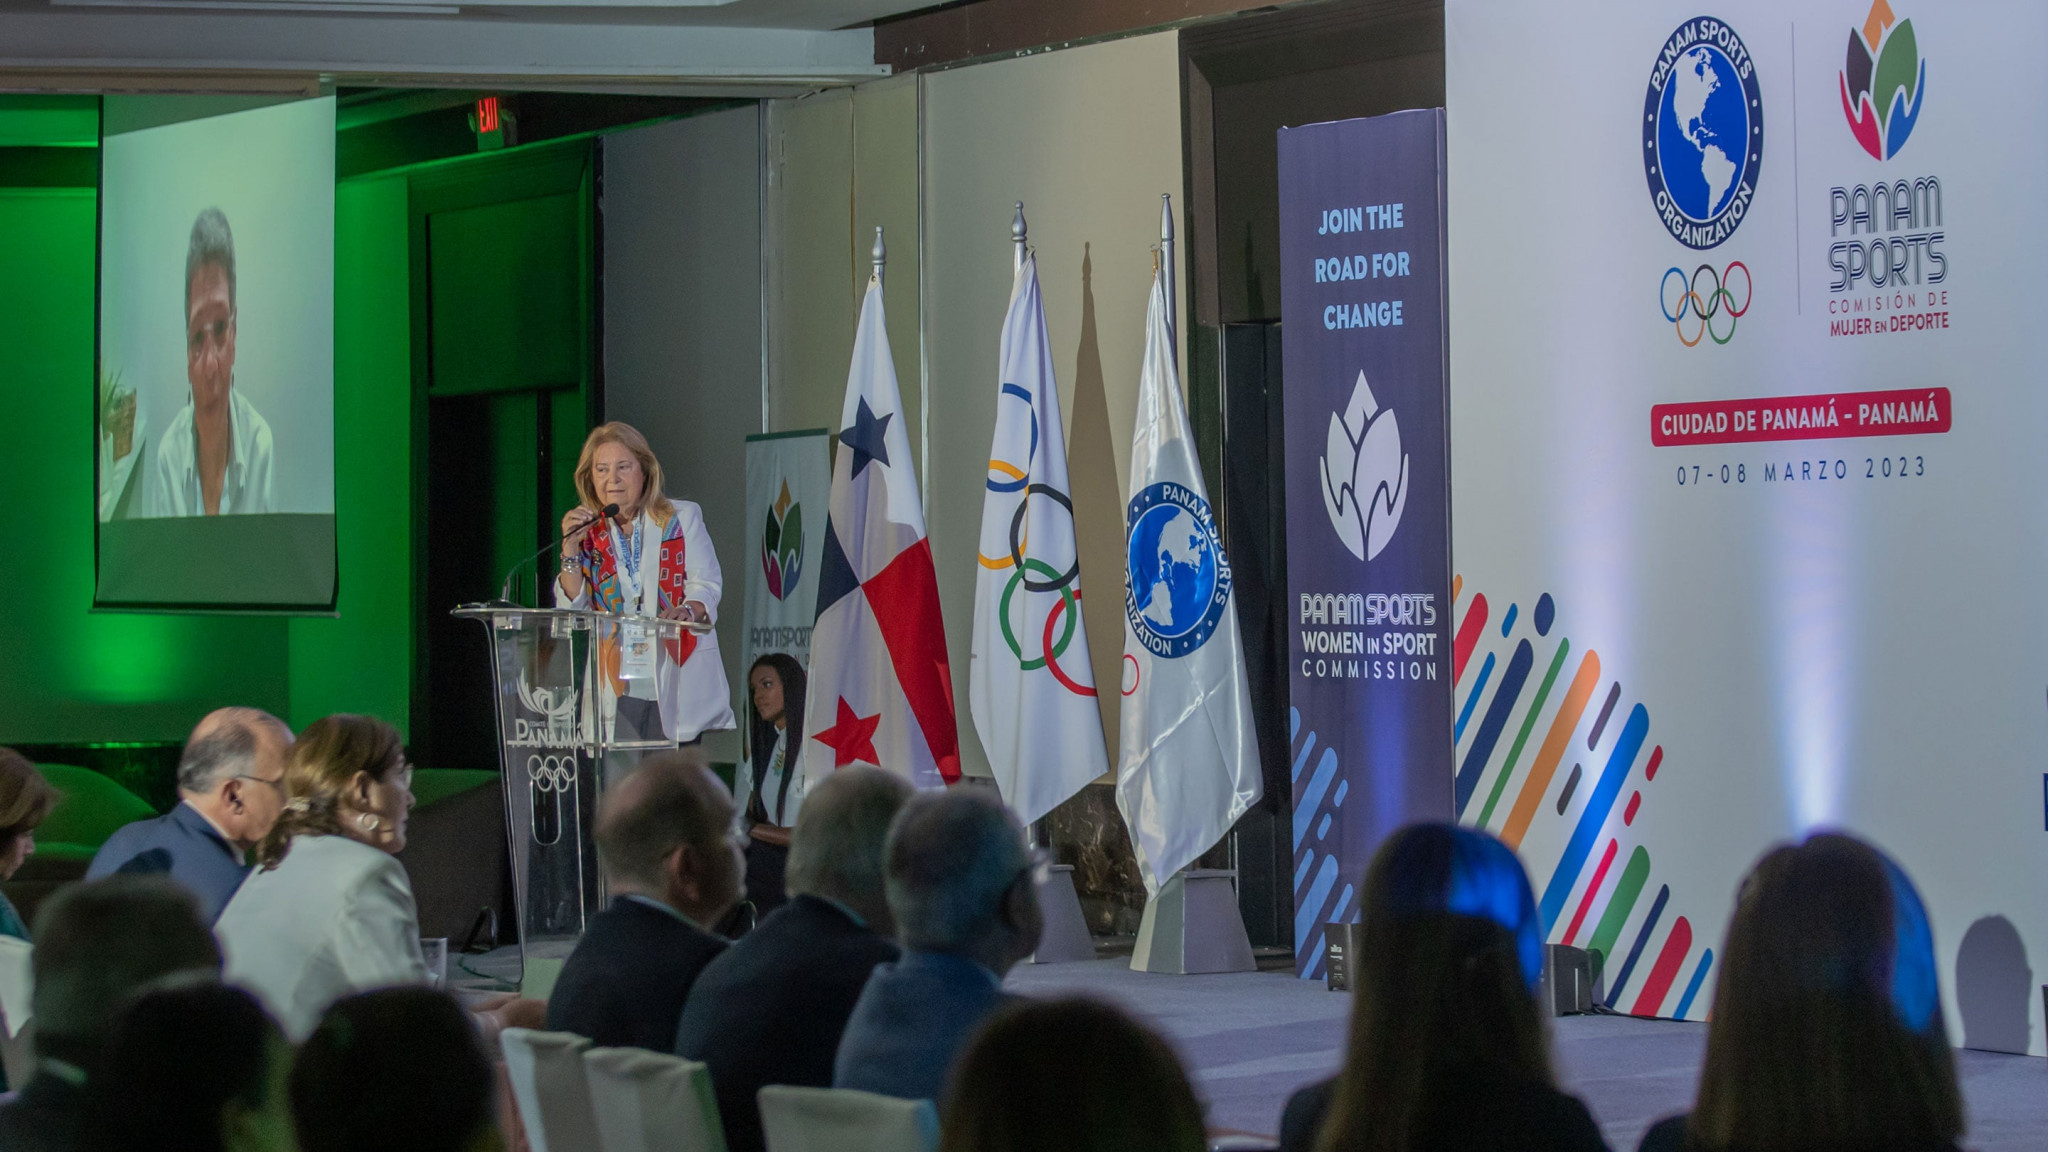 The Panam Sports Women in Sport Conference  aims to advance gender equality and safe sport in the region ©IOC